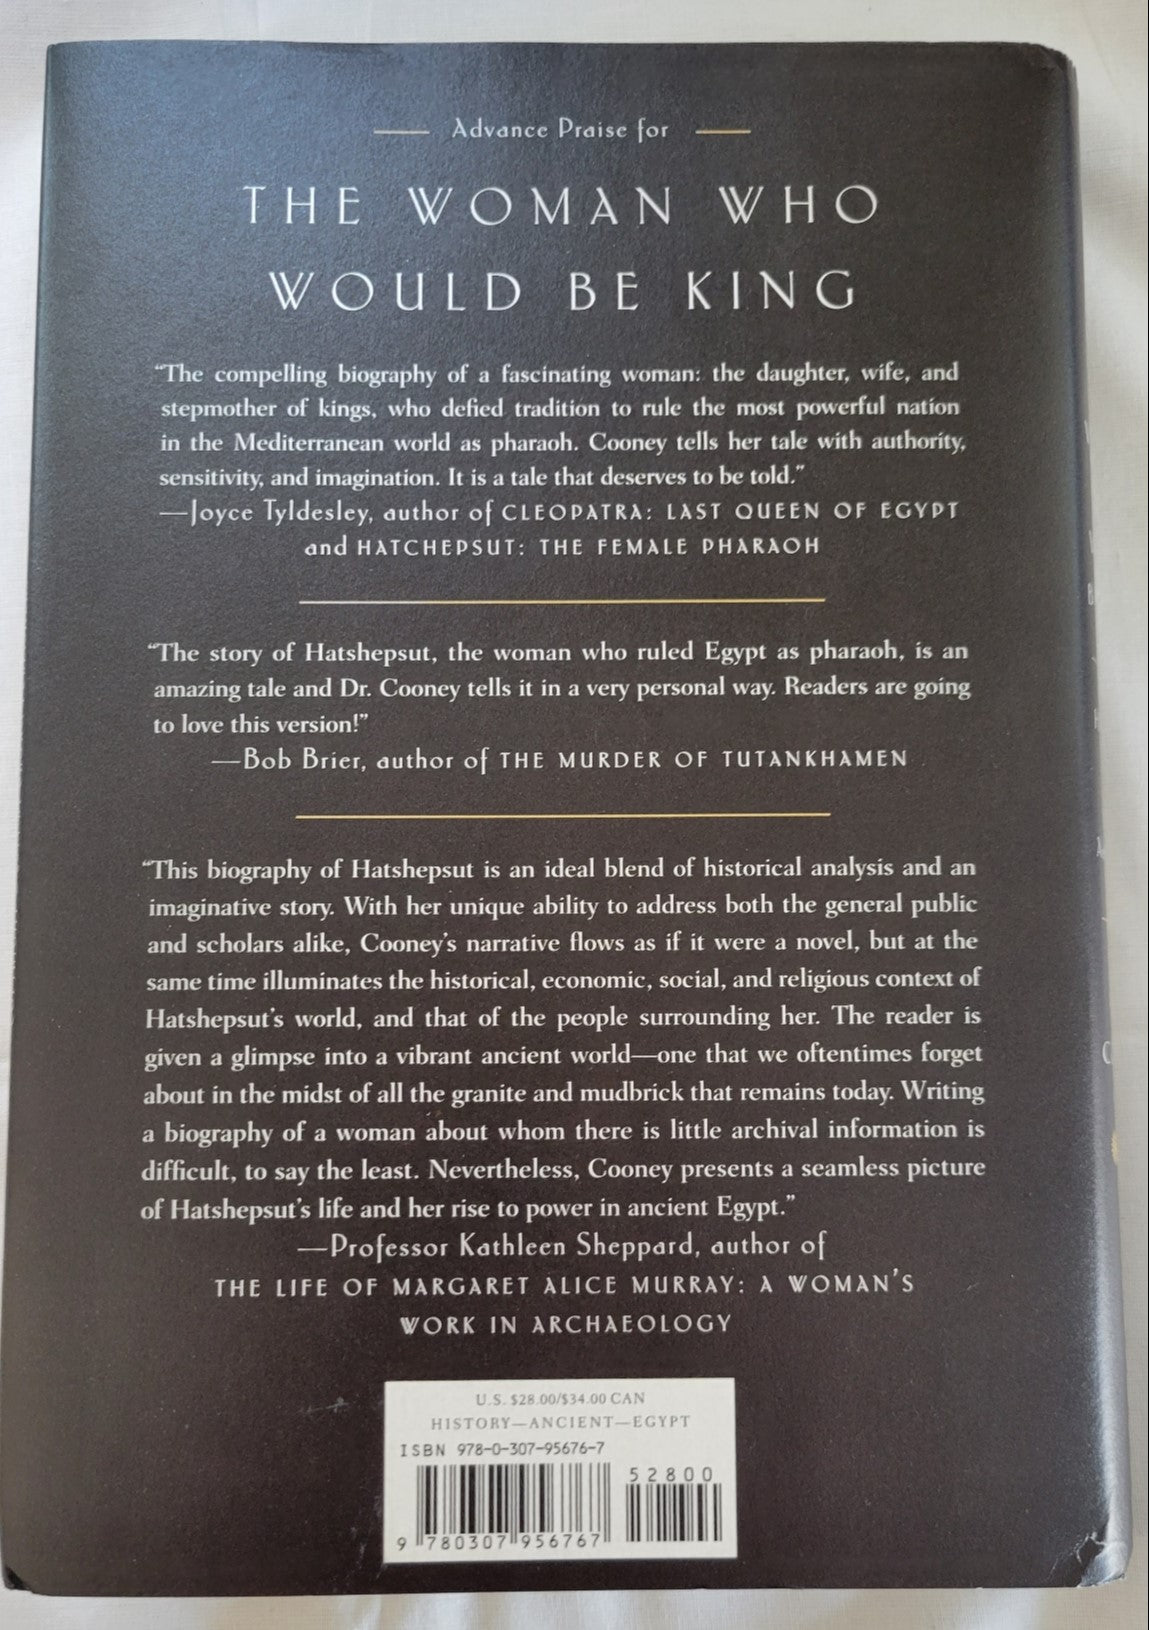 Used book for sale “The Woman Who Would Be King” written by Kara Cooney. Back cover.